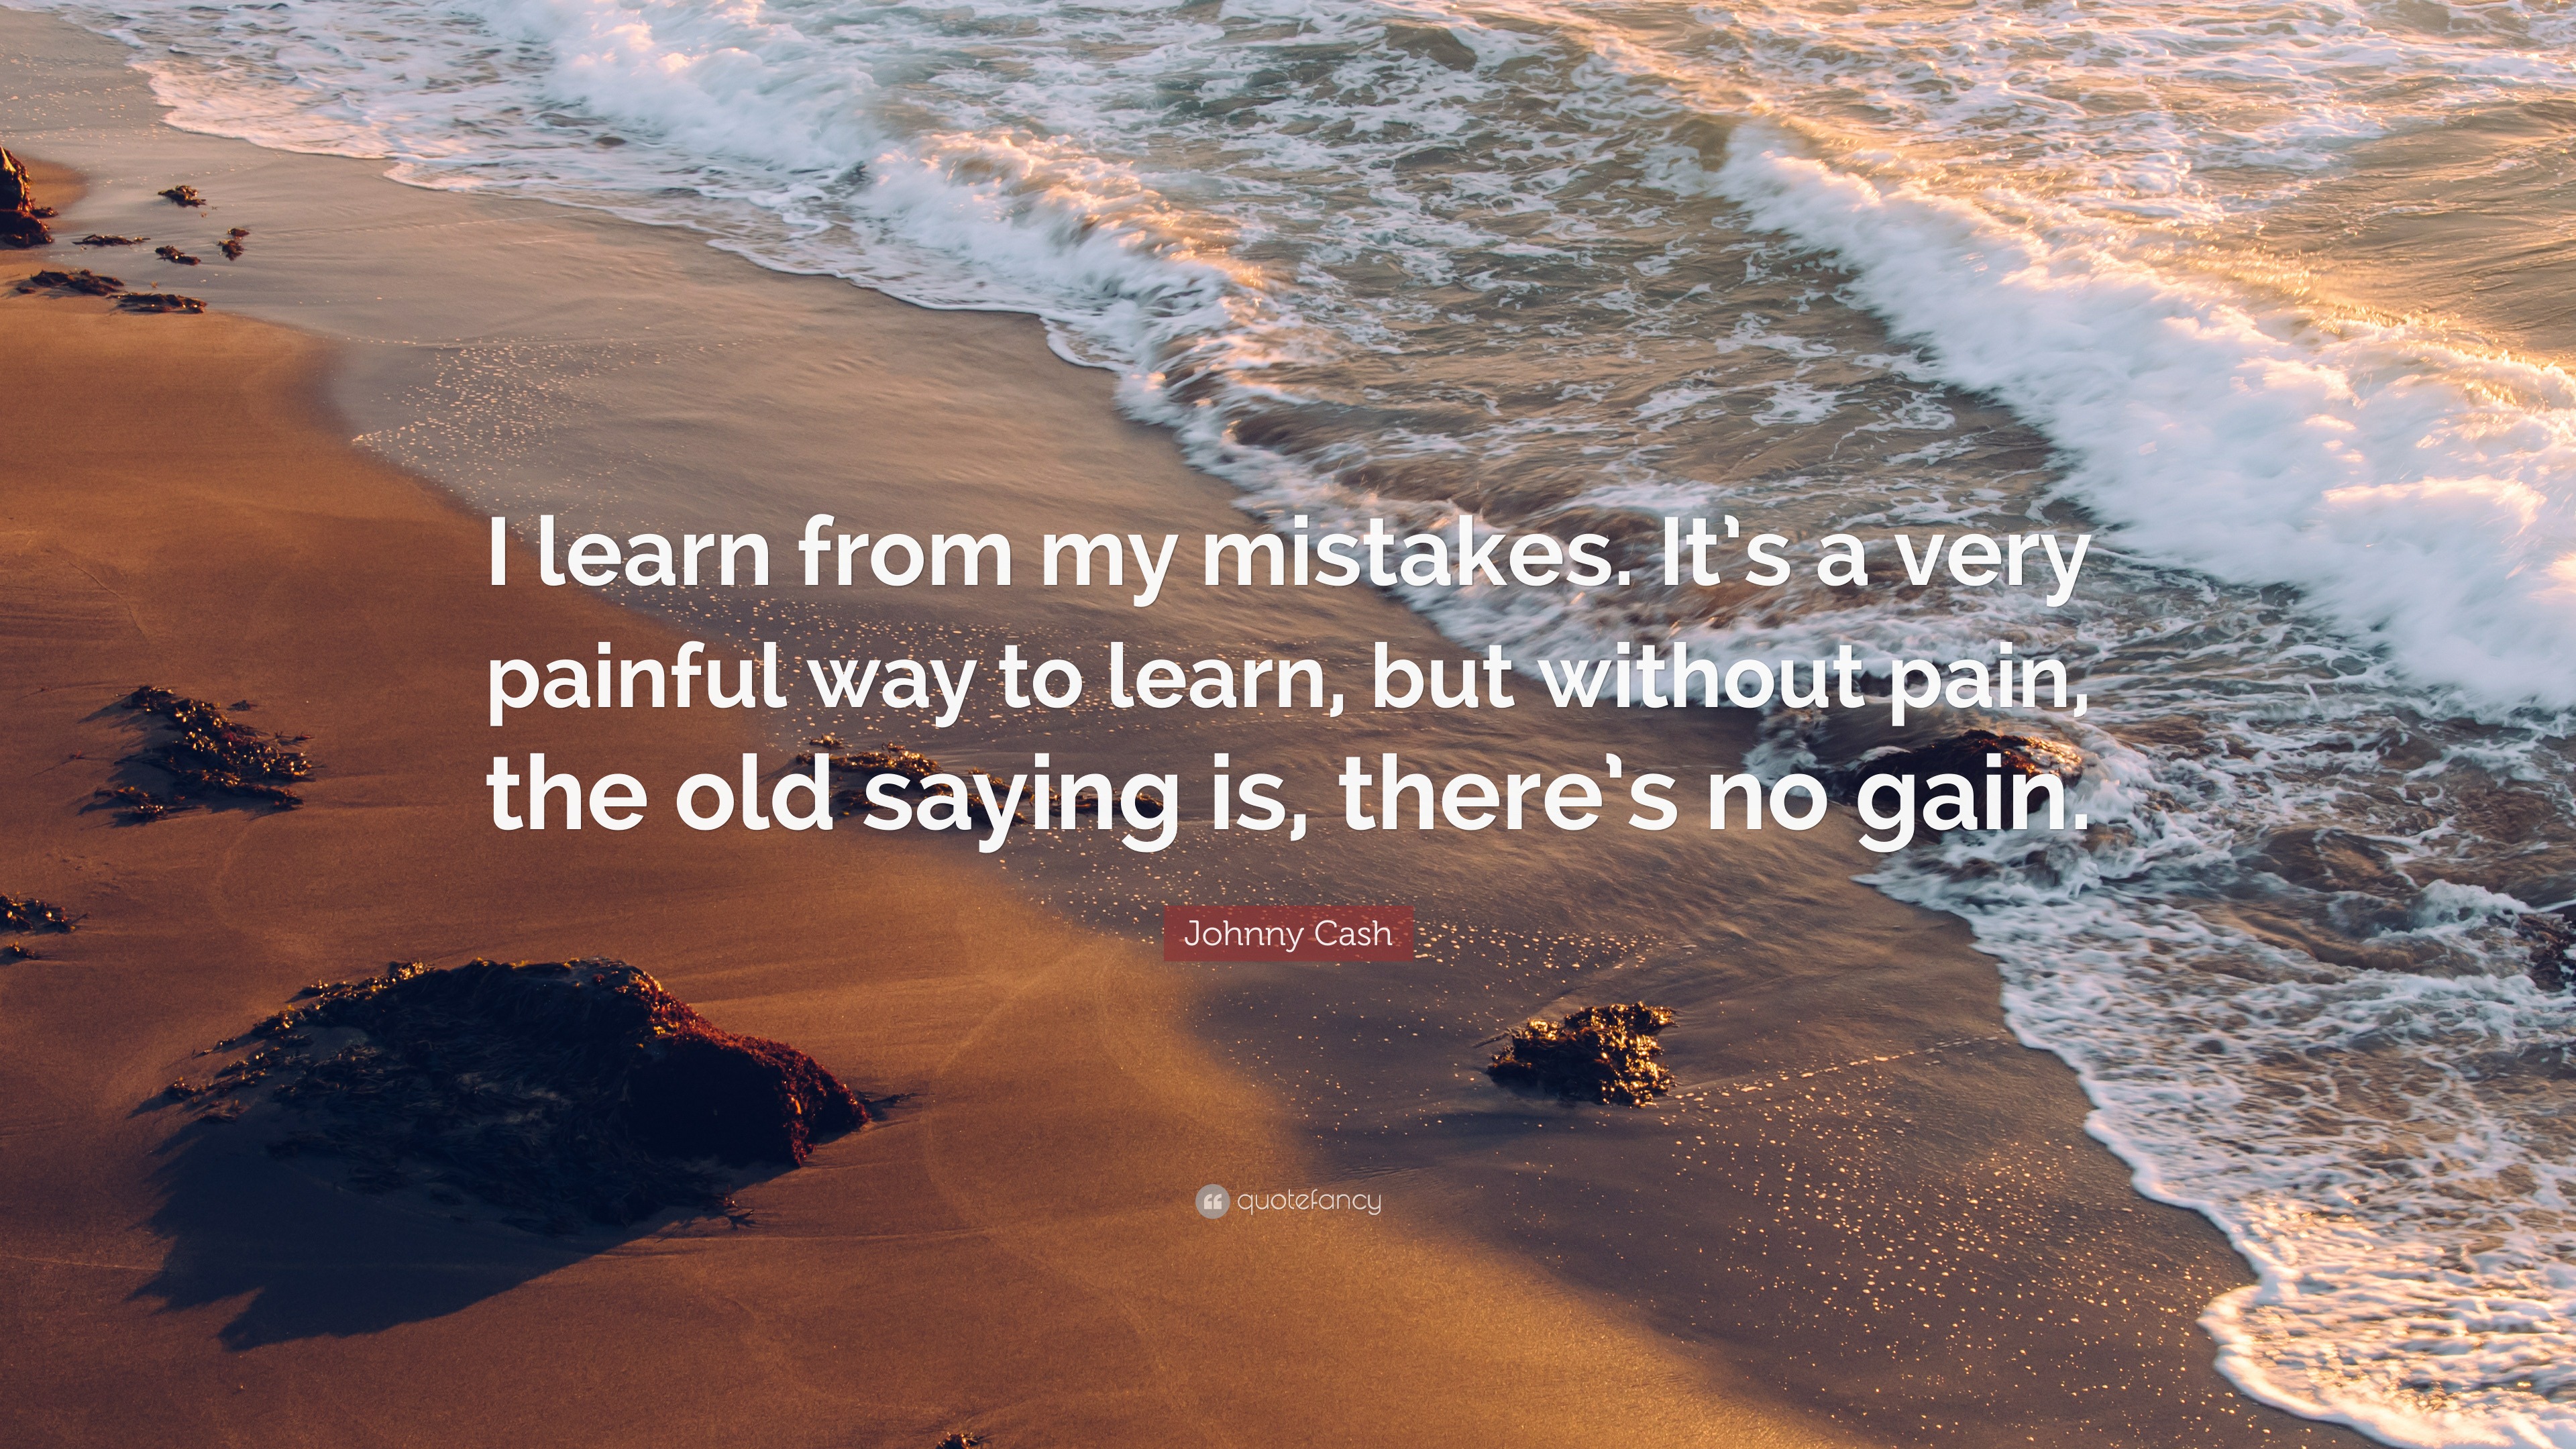 Johnny Cash Quote: “I learn from my mistakes. It’s a very painful way